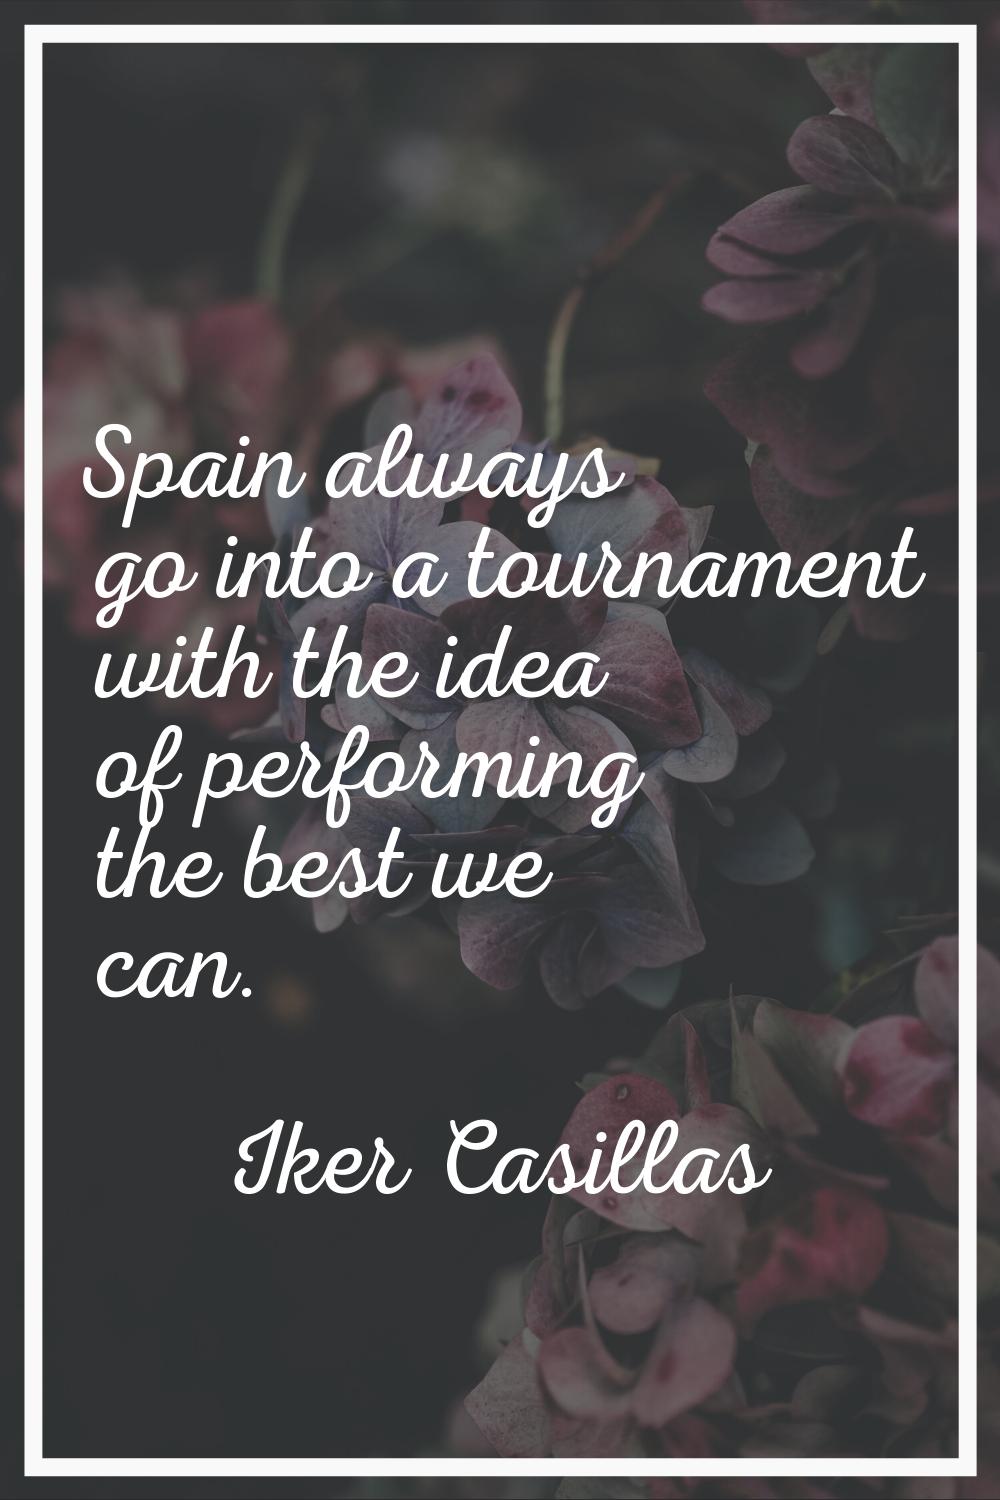 Spain always go into a tournament with the idea of performing the best we can.